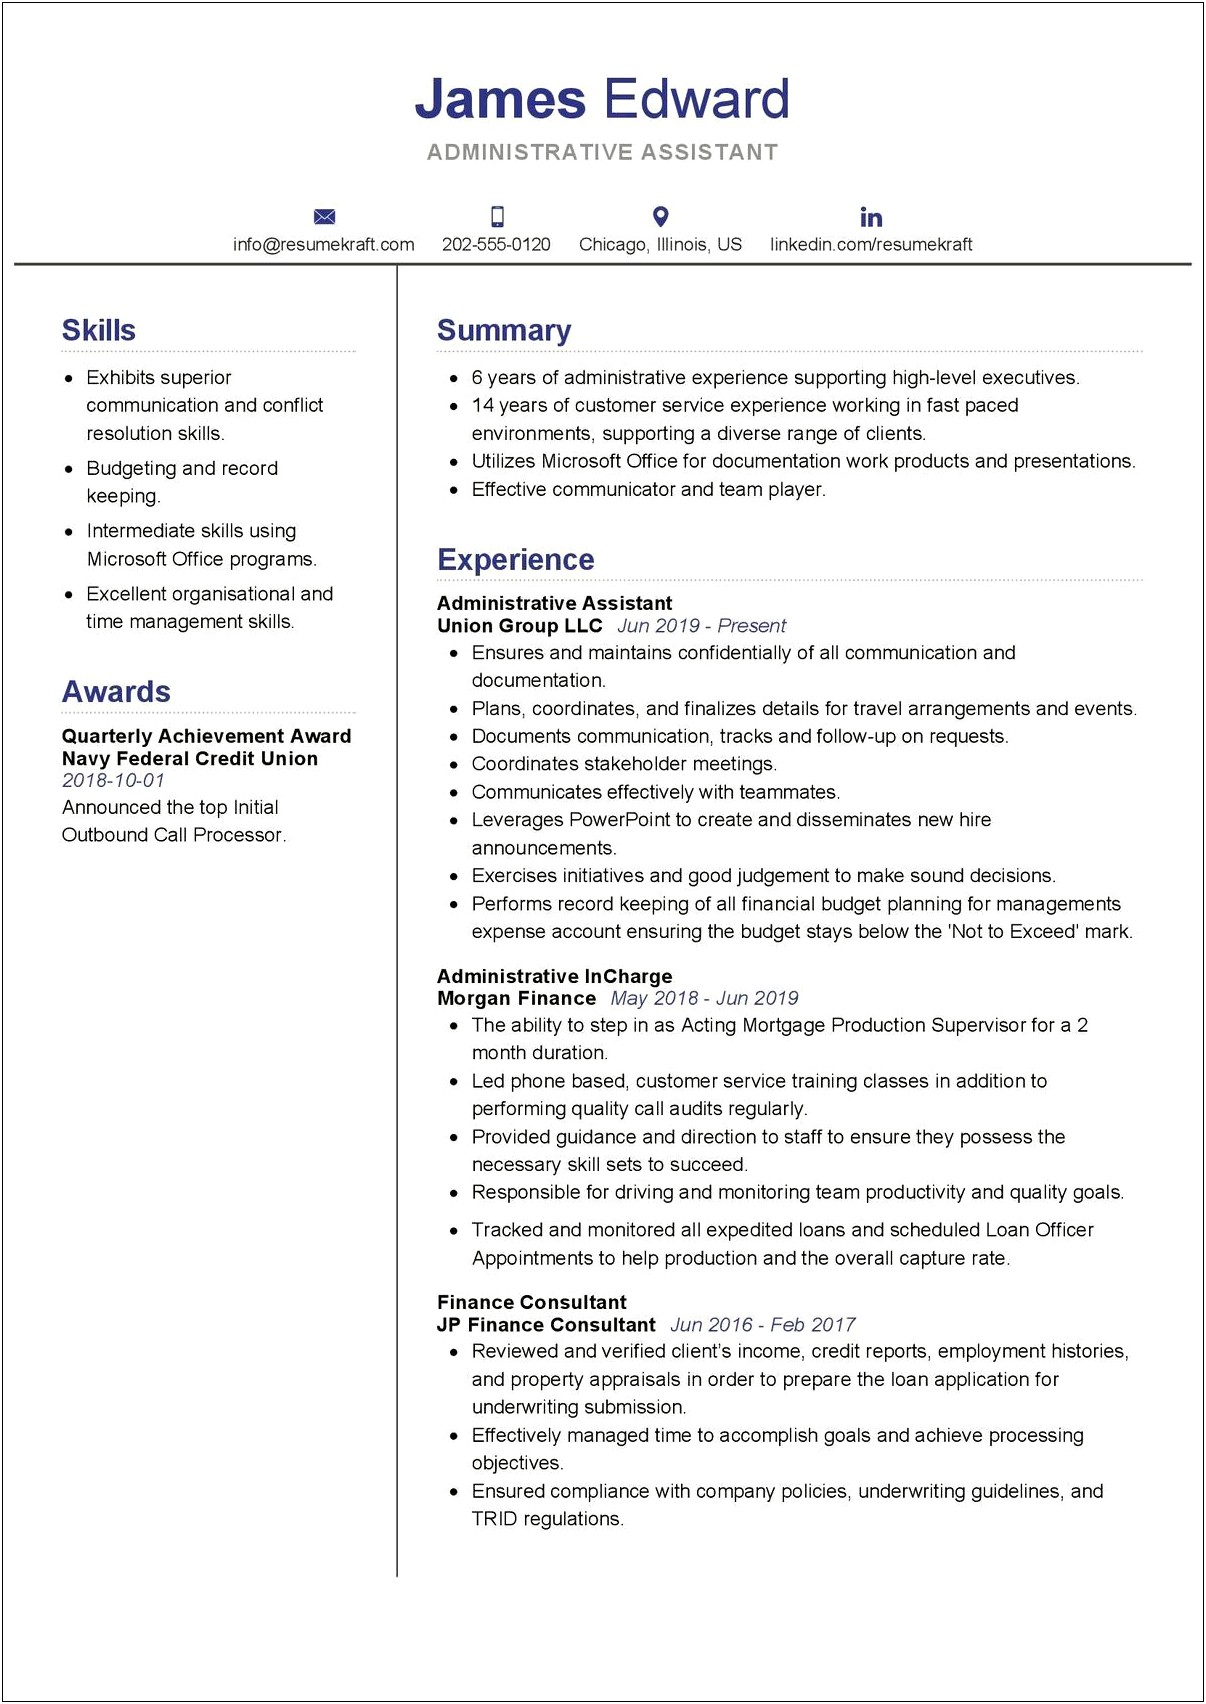 Key Word Search For Executive Assistant Resumes